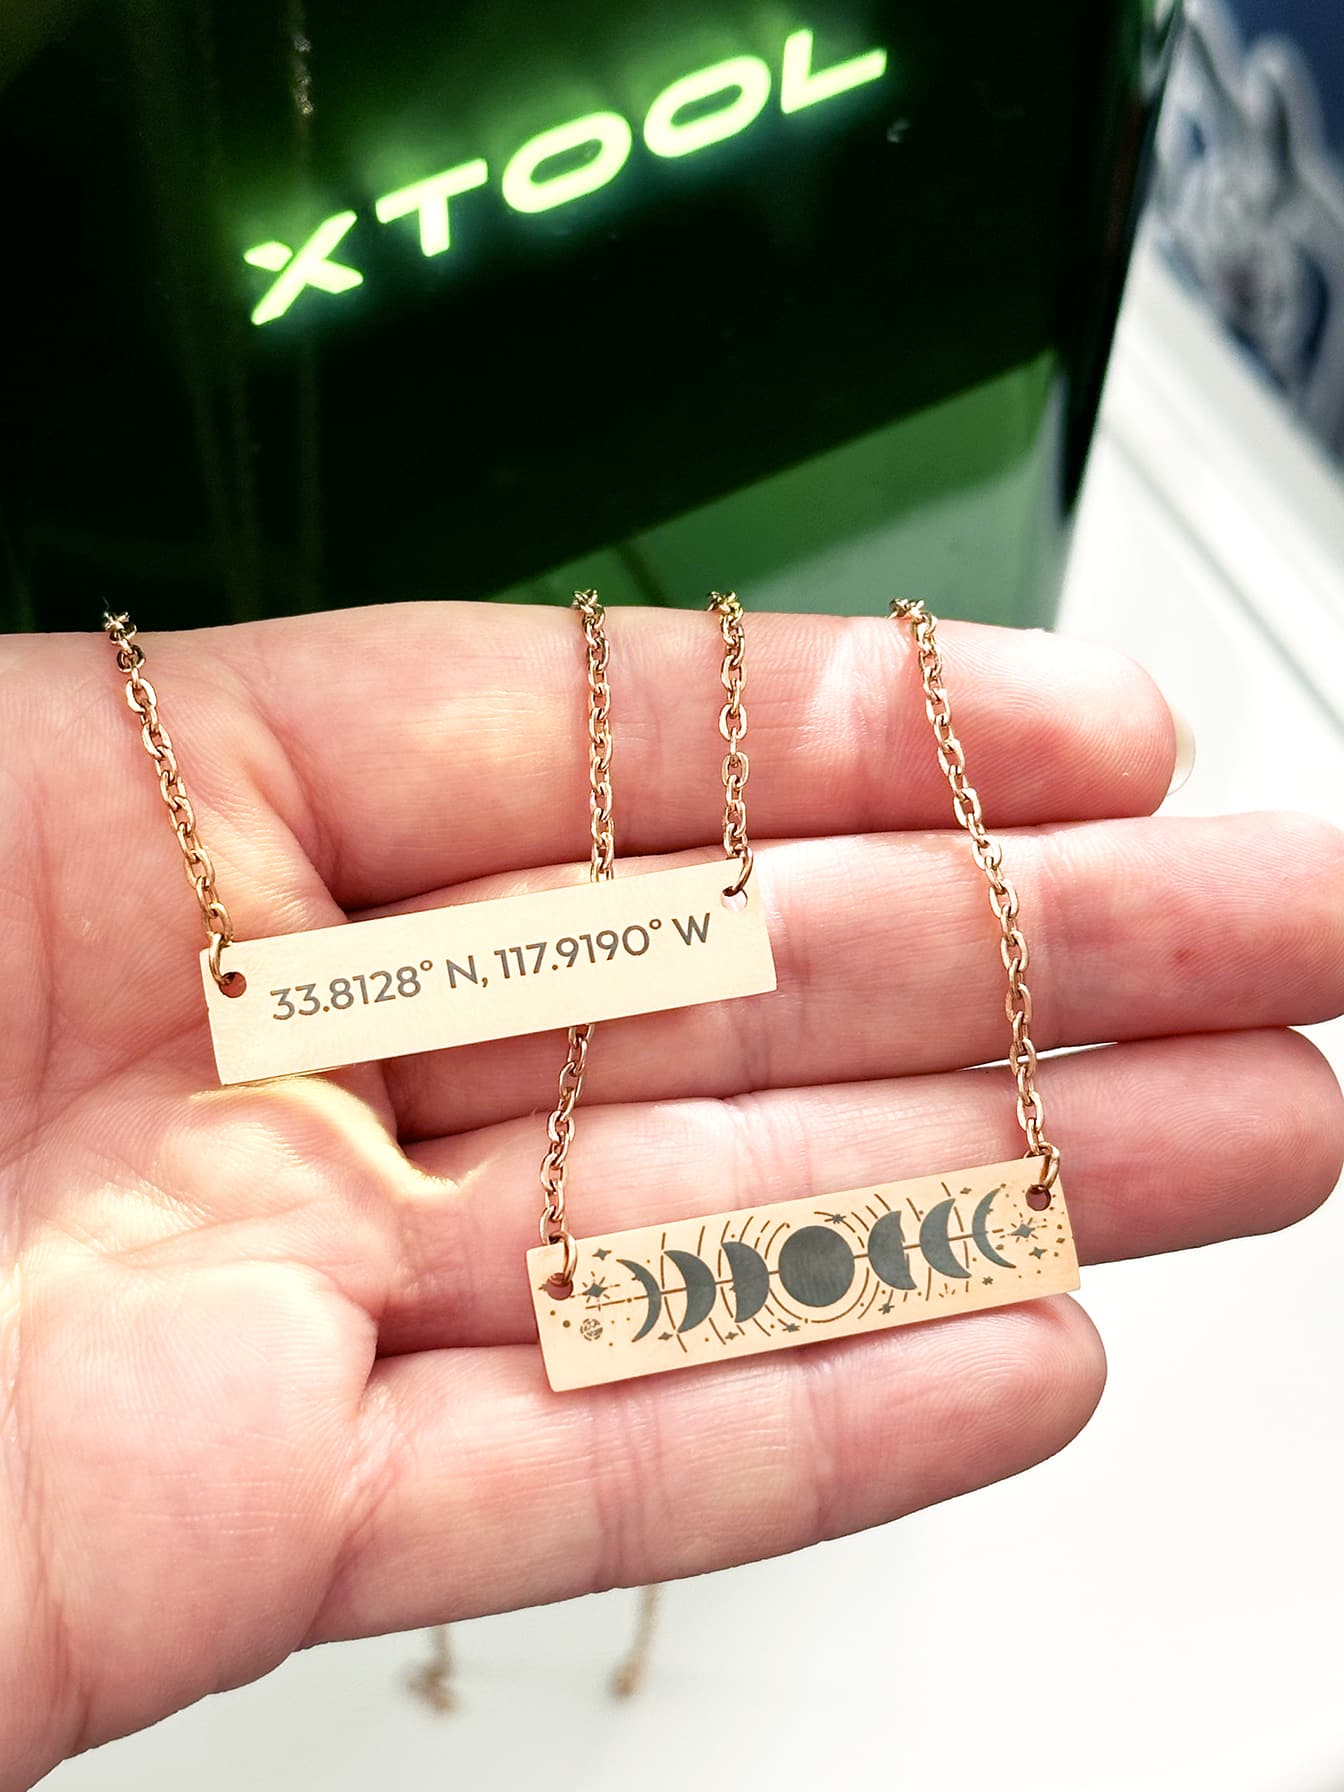 Make Laser Engraved Jewelry with the xTool F1 Laser Machine